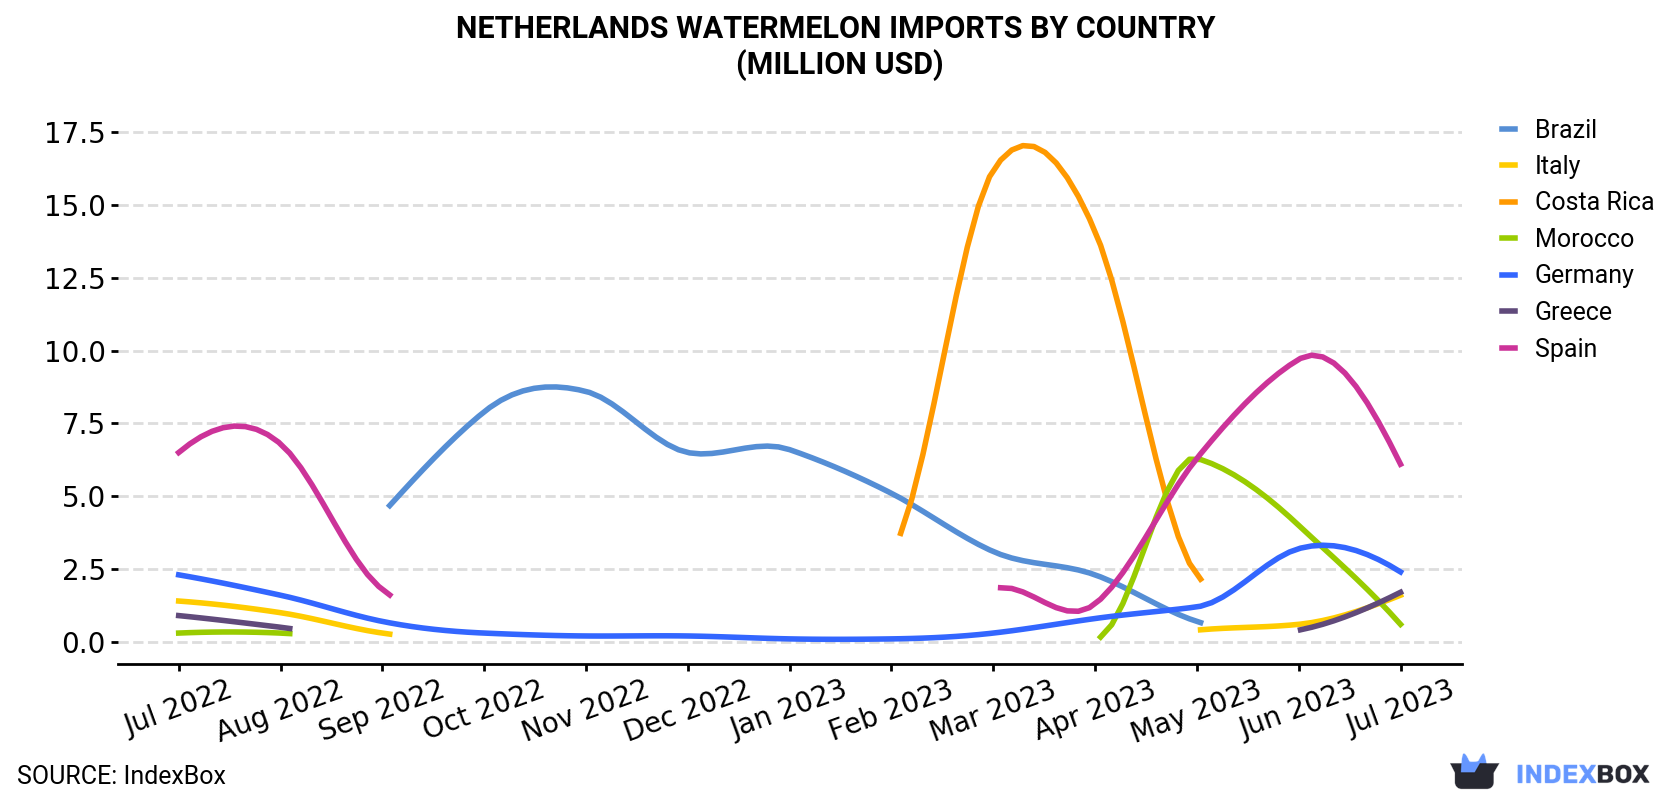 Netherlands Watermelon Imports By Country (Million USD)